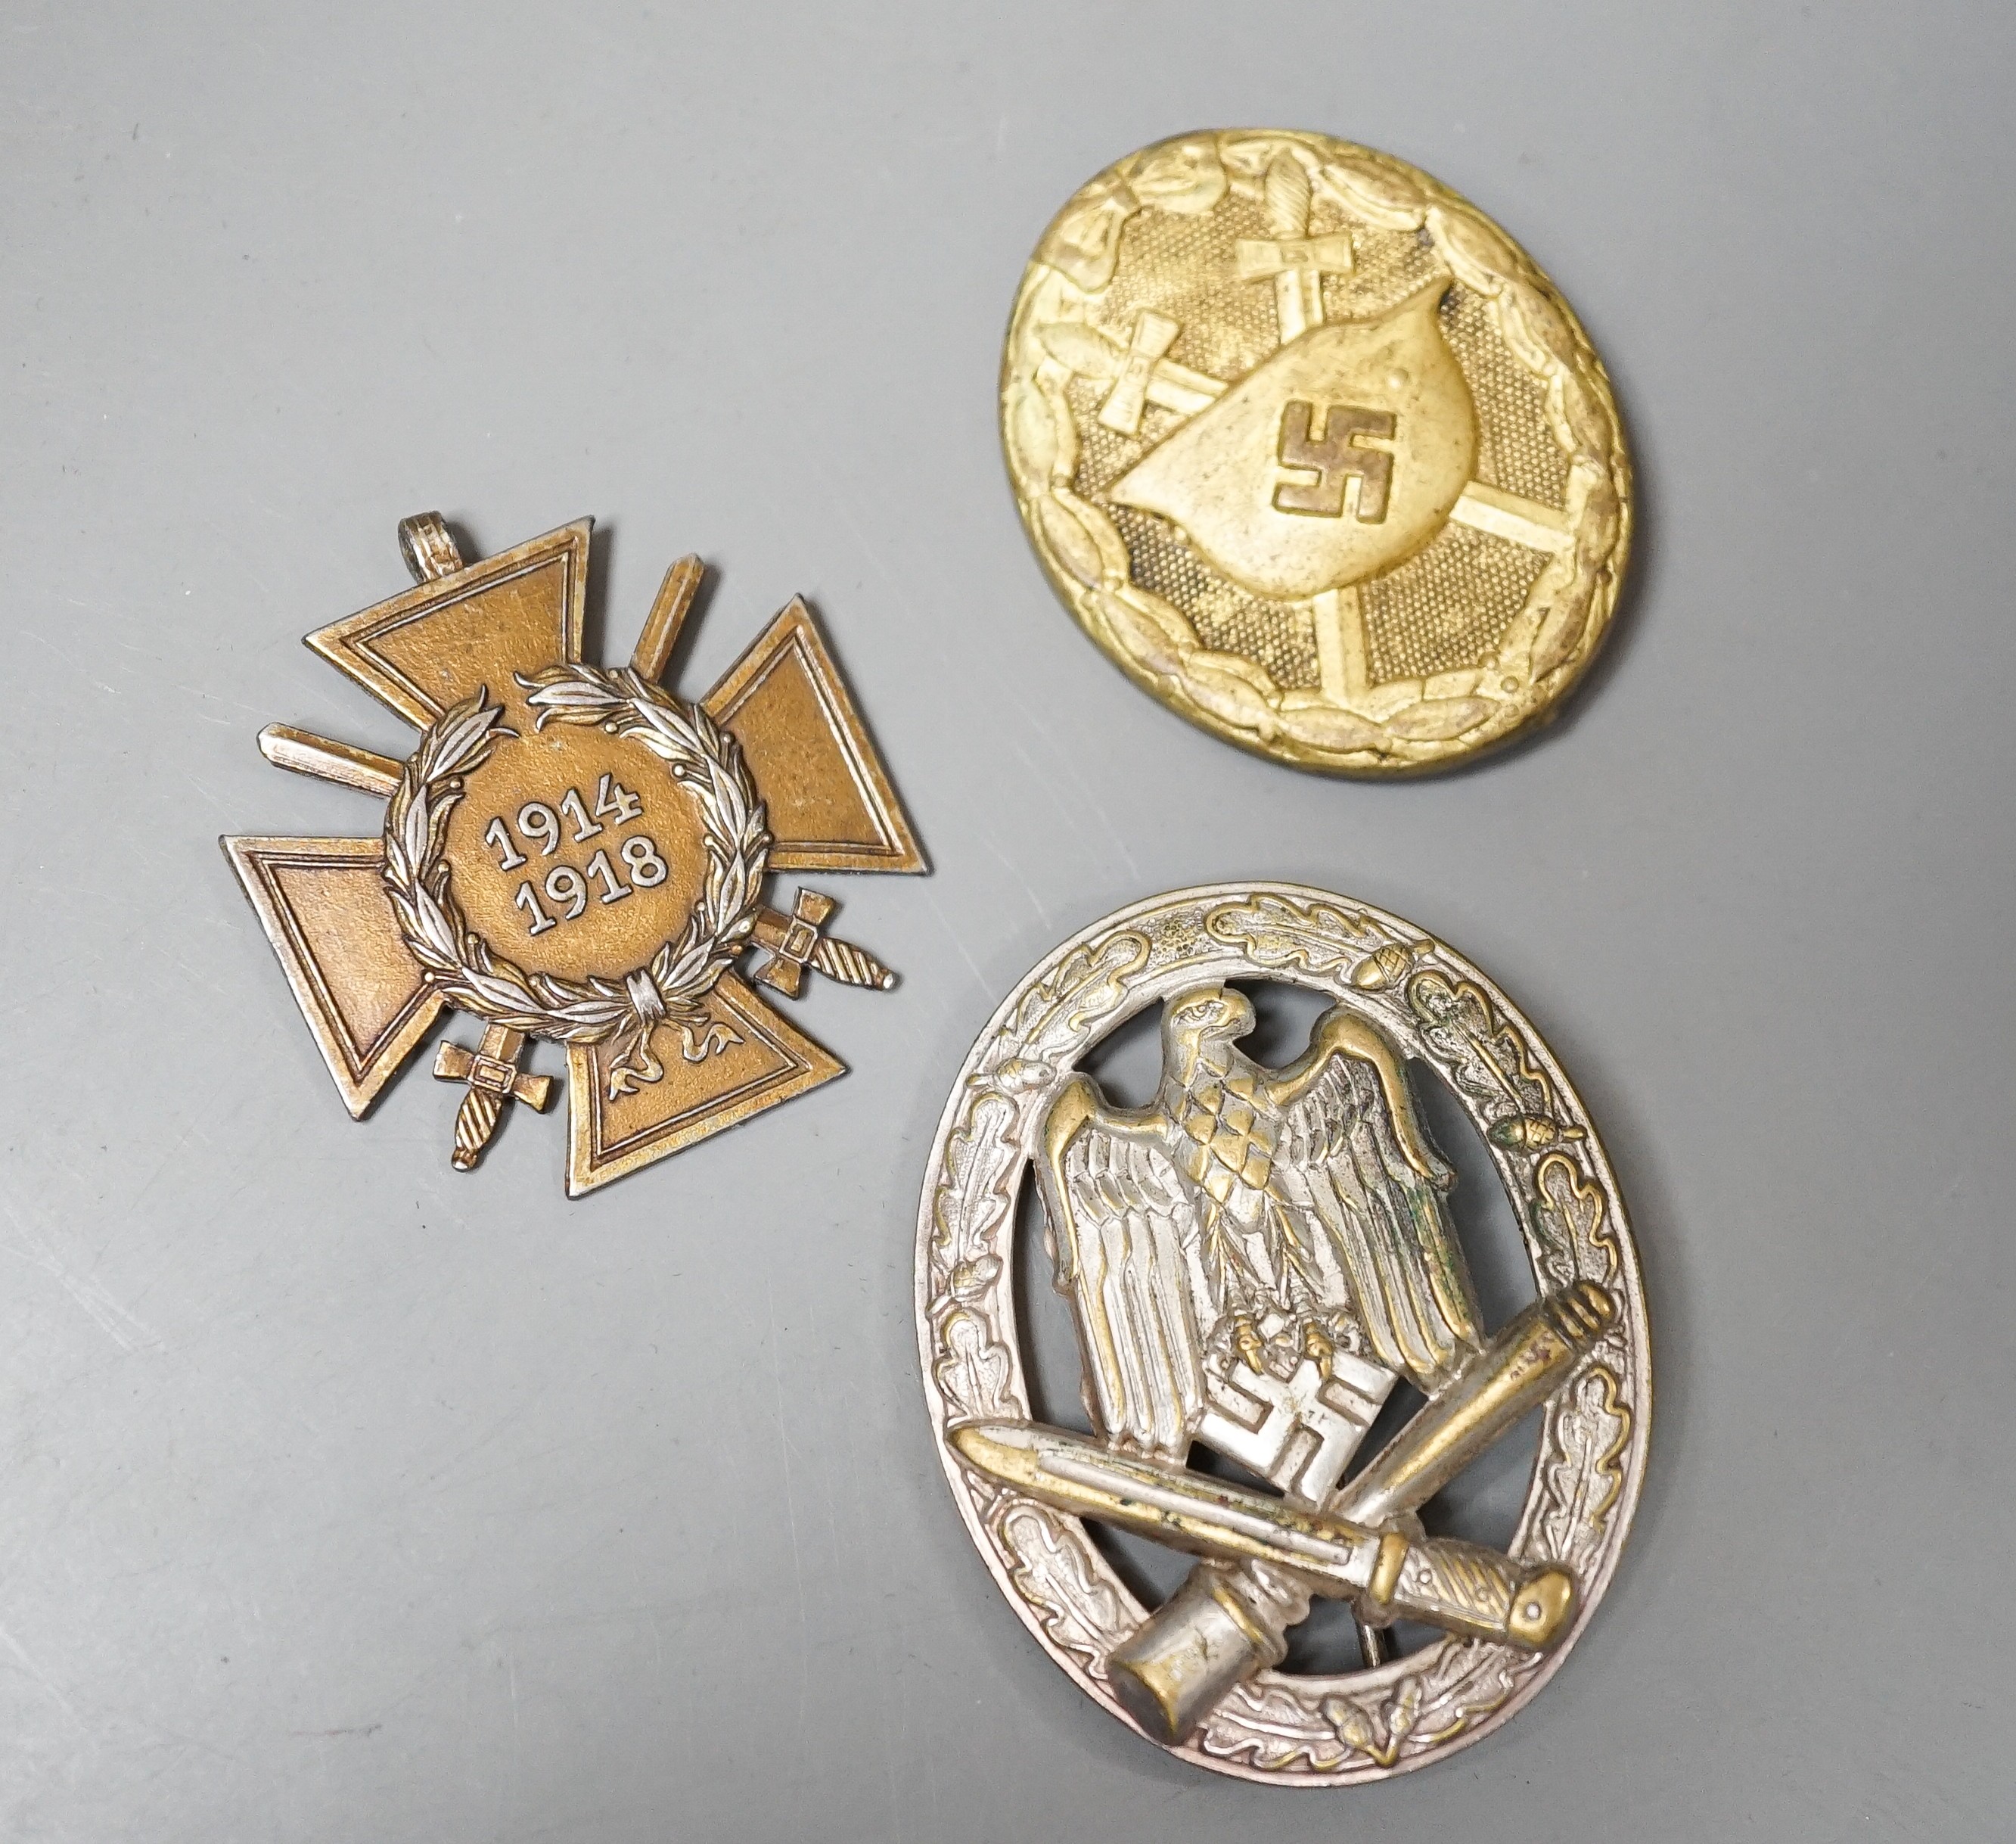 A WW2 German Army / Waffen-SS General Assault Combat Badge in Silvered brass and a Third Reich Wound